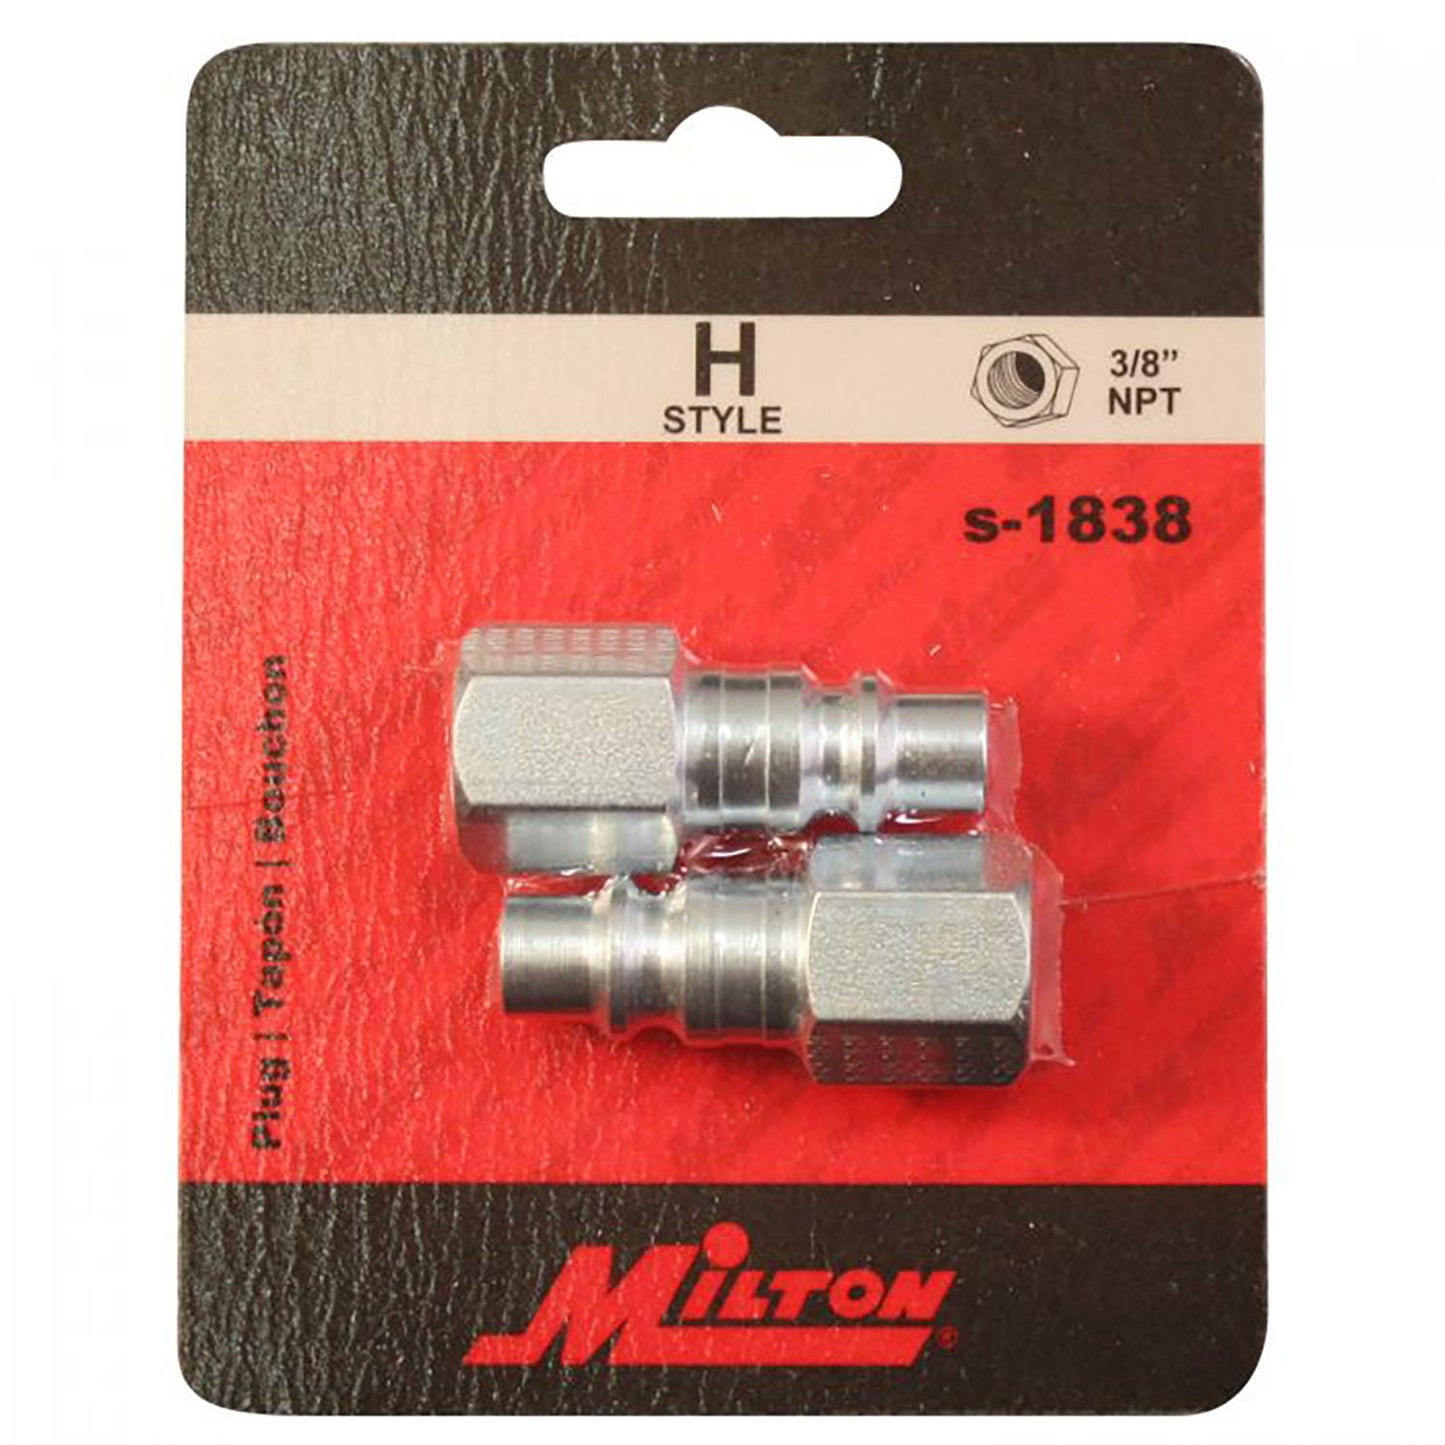 Milton H Style Plugs 3/8" Female NPT Steel Quick Release Plugs S-1838 Two Pack